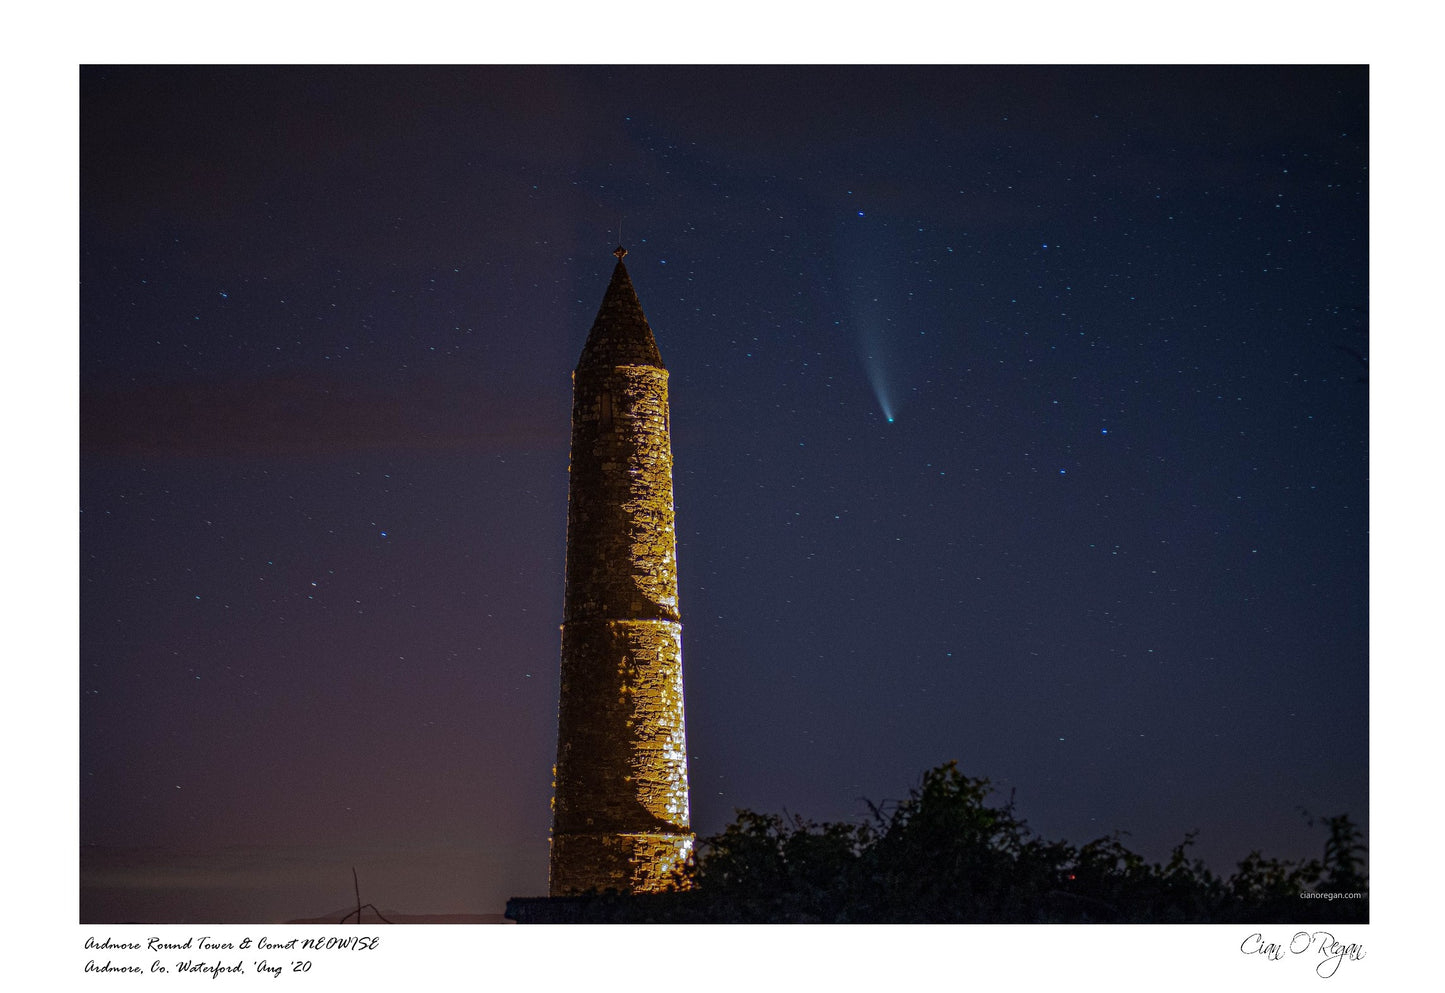 Ardmore Round Tower and Comet NEOWISE